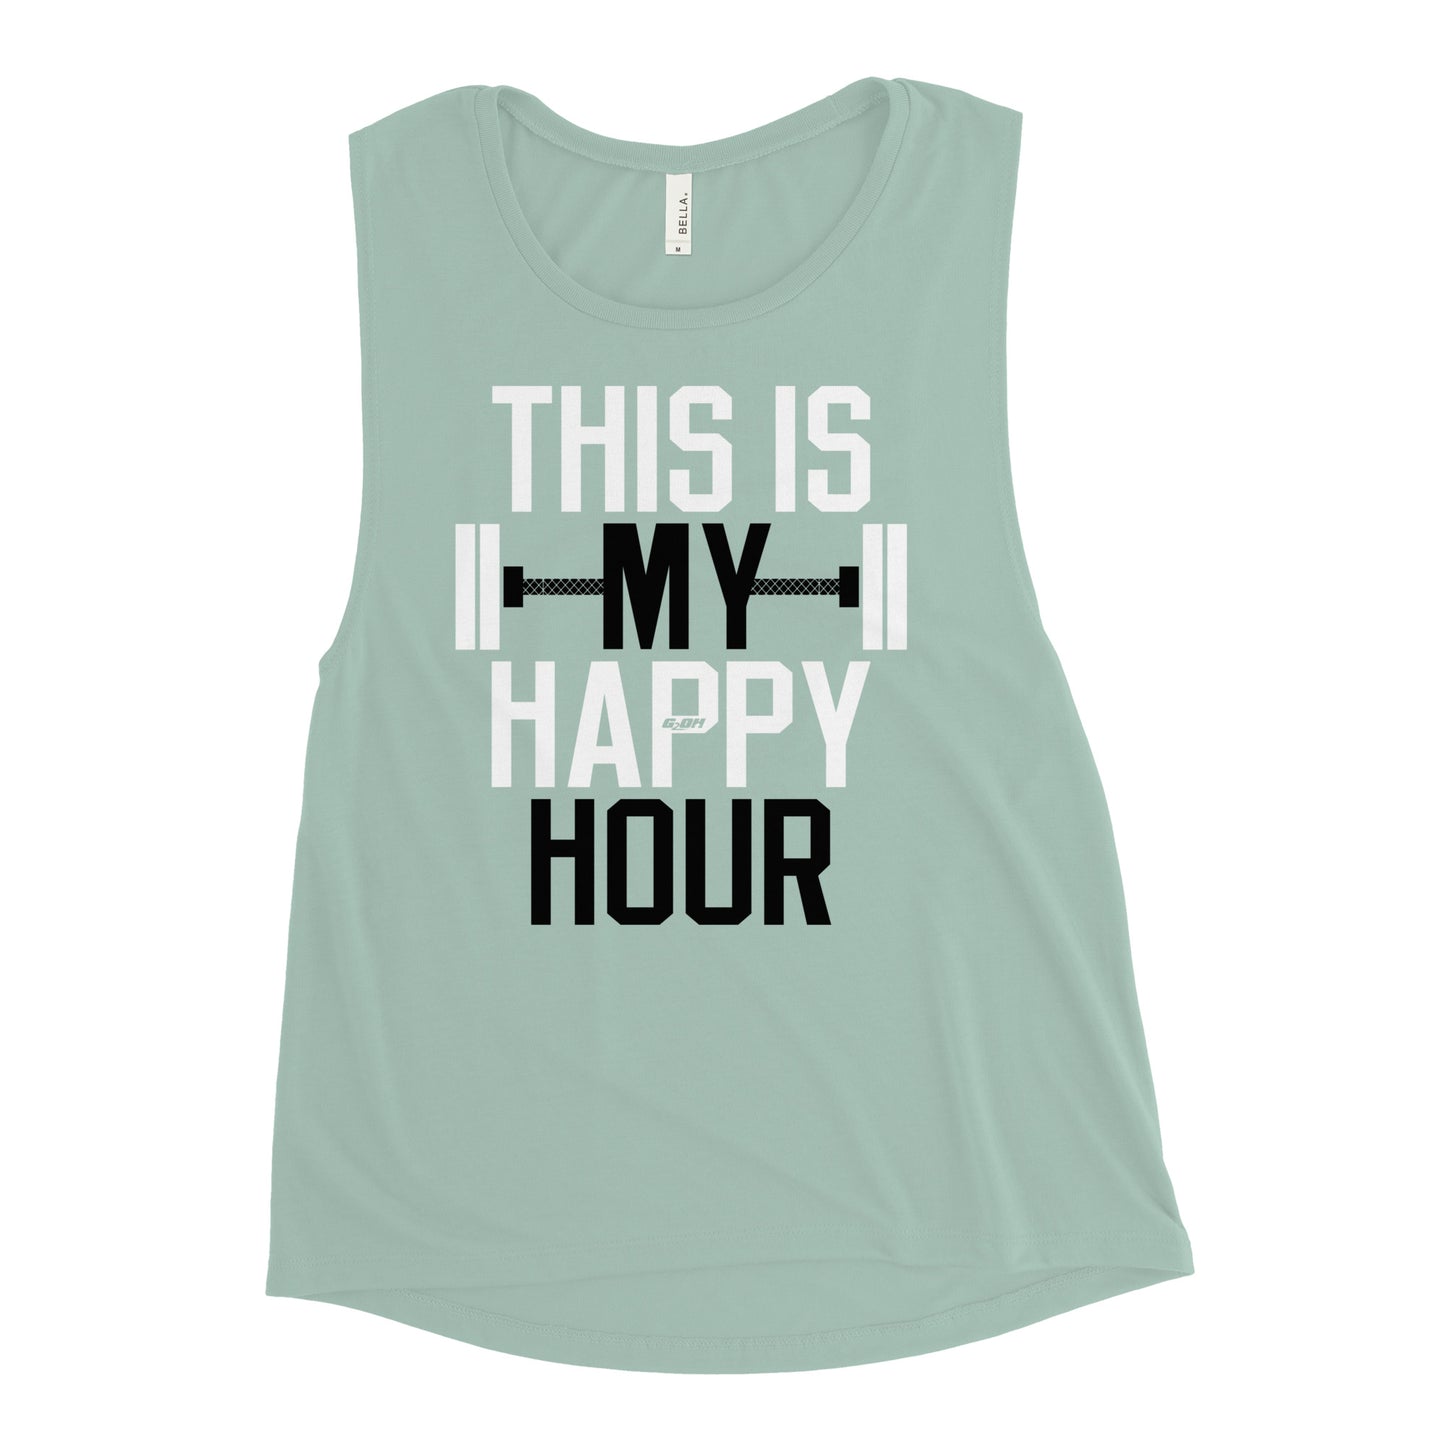 This Is My Happy Hour Women's Muscle Tank